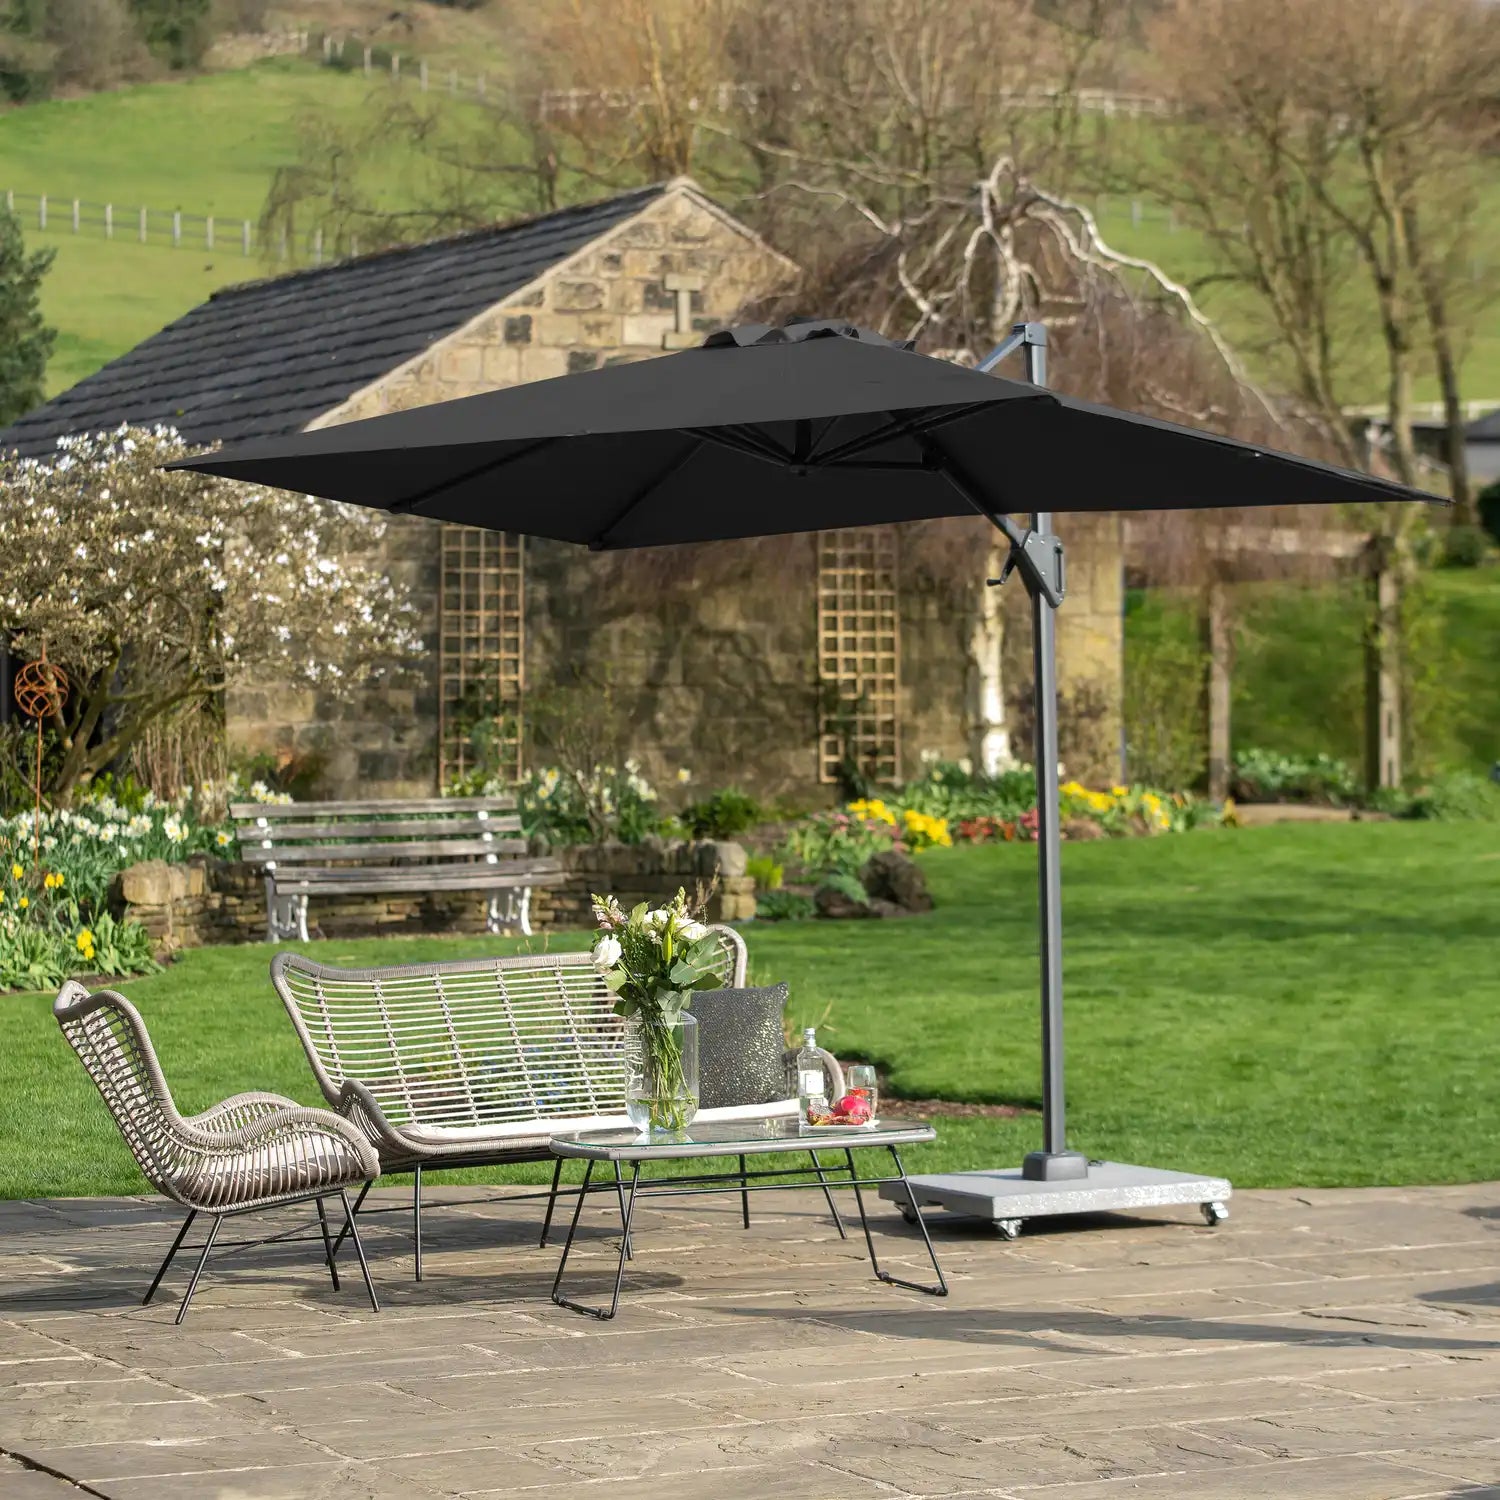 Platinum Voyager T1 3x2m Oblong Cantilever Parasol in Anthracite Grey – Click Style